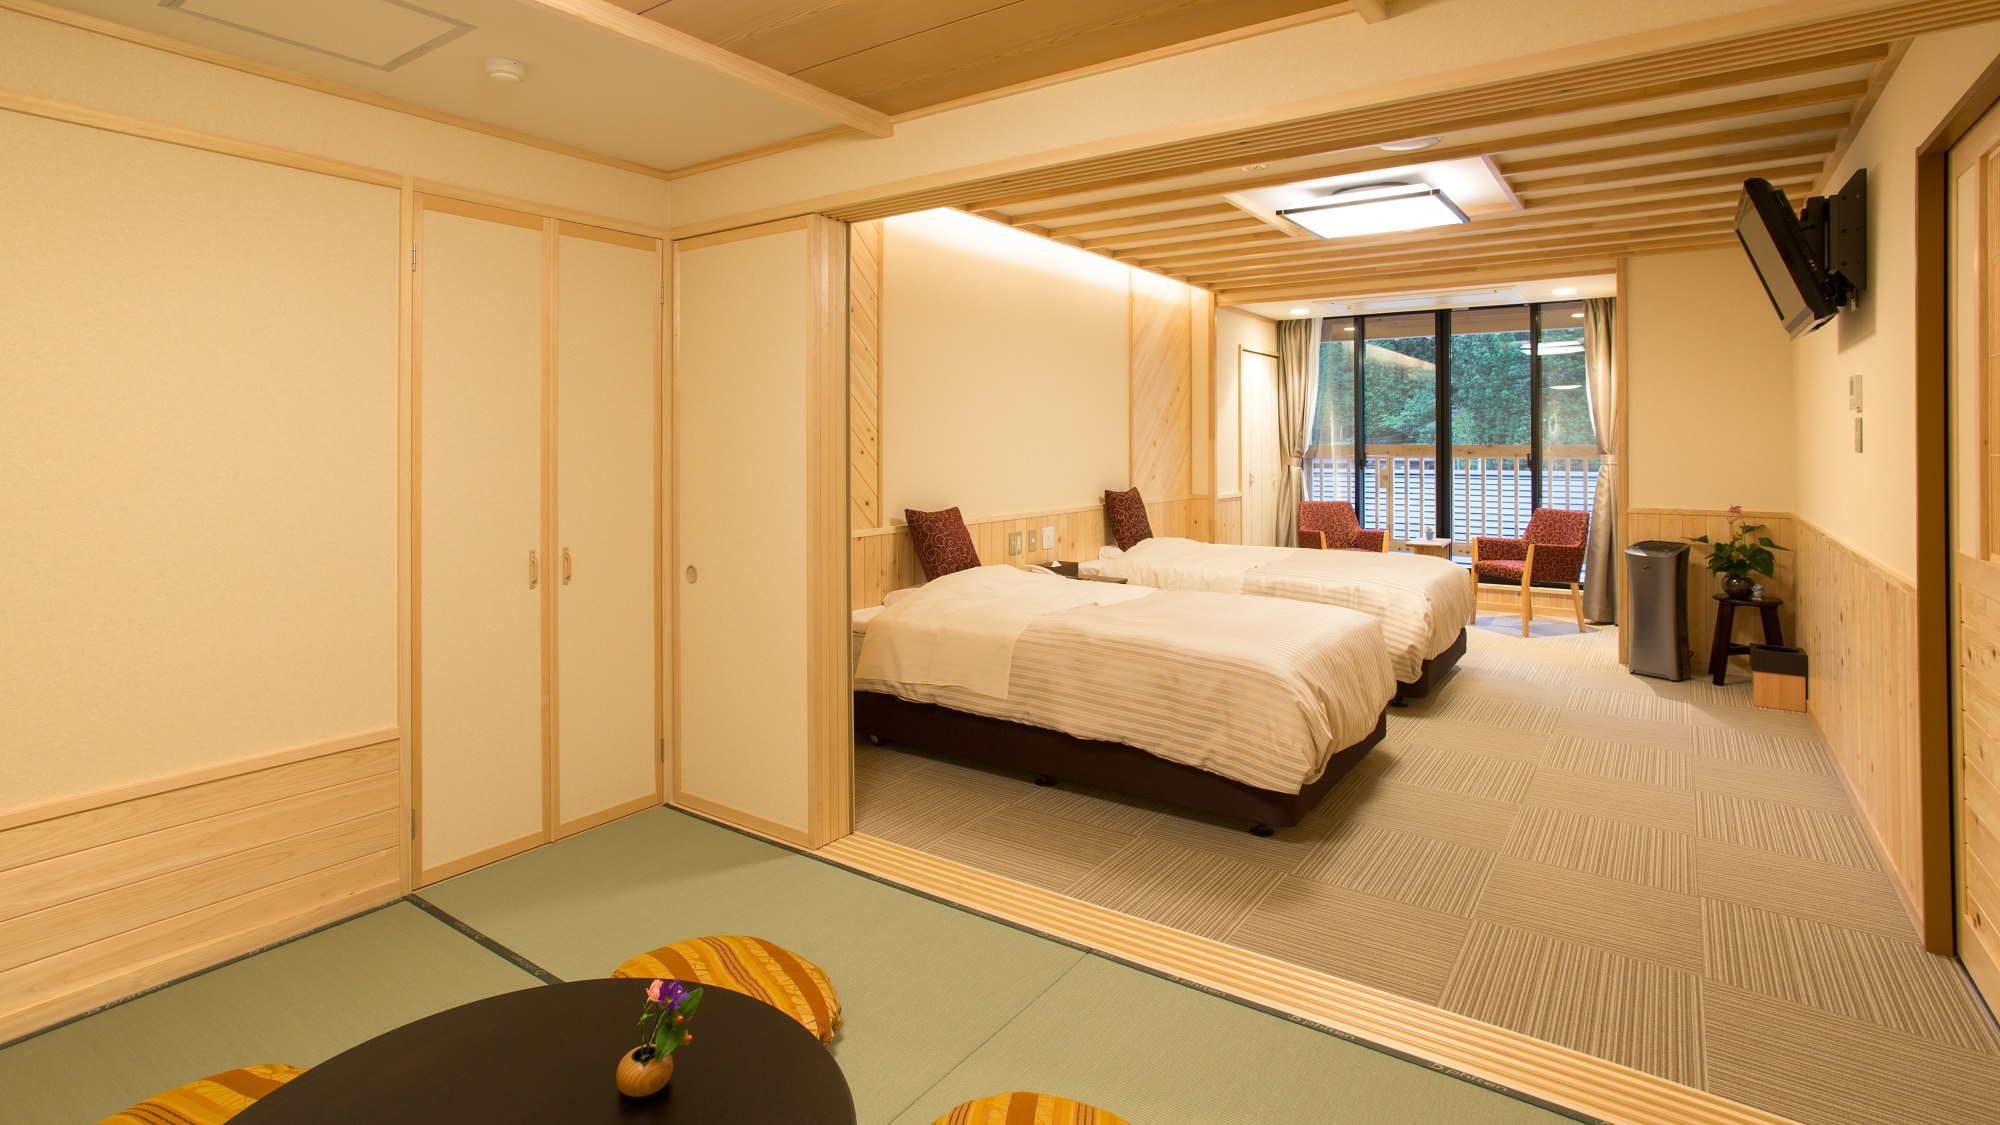 Japanese-Western style room No. 307 with open-air bath